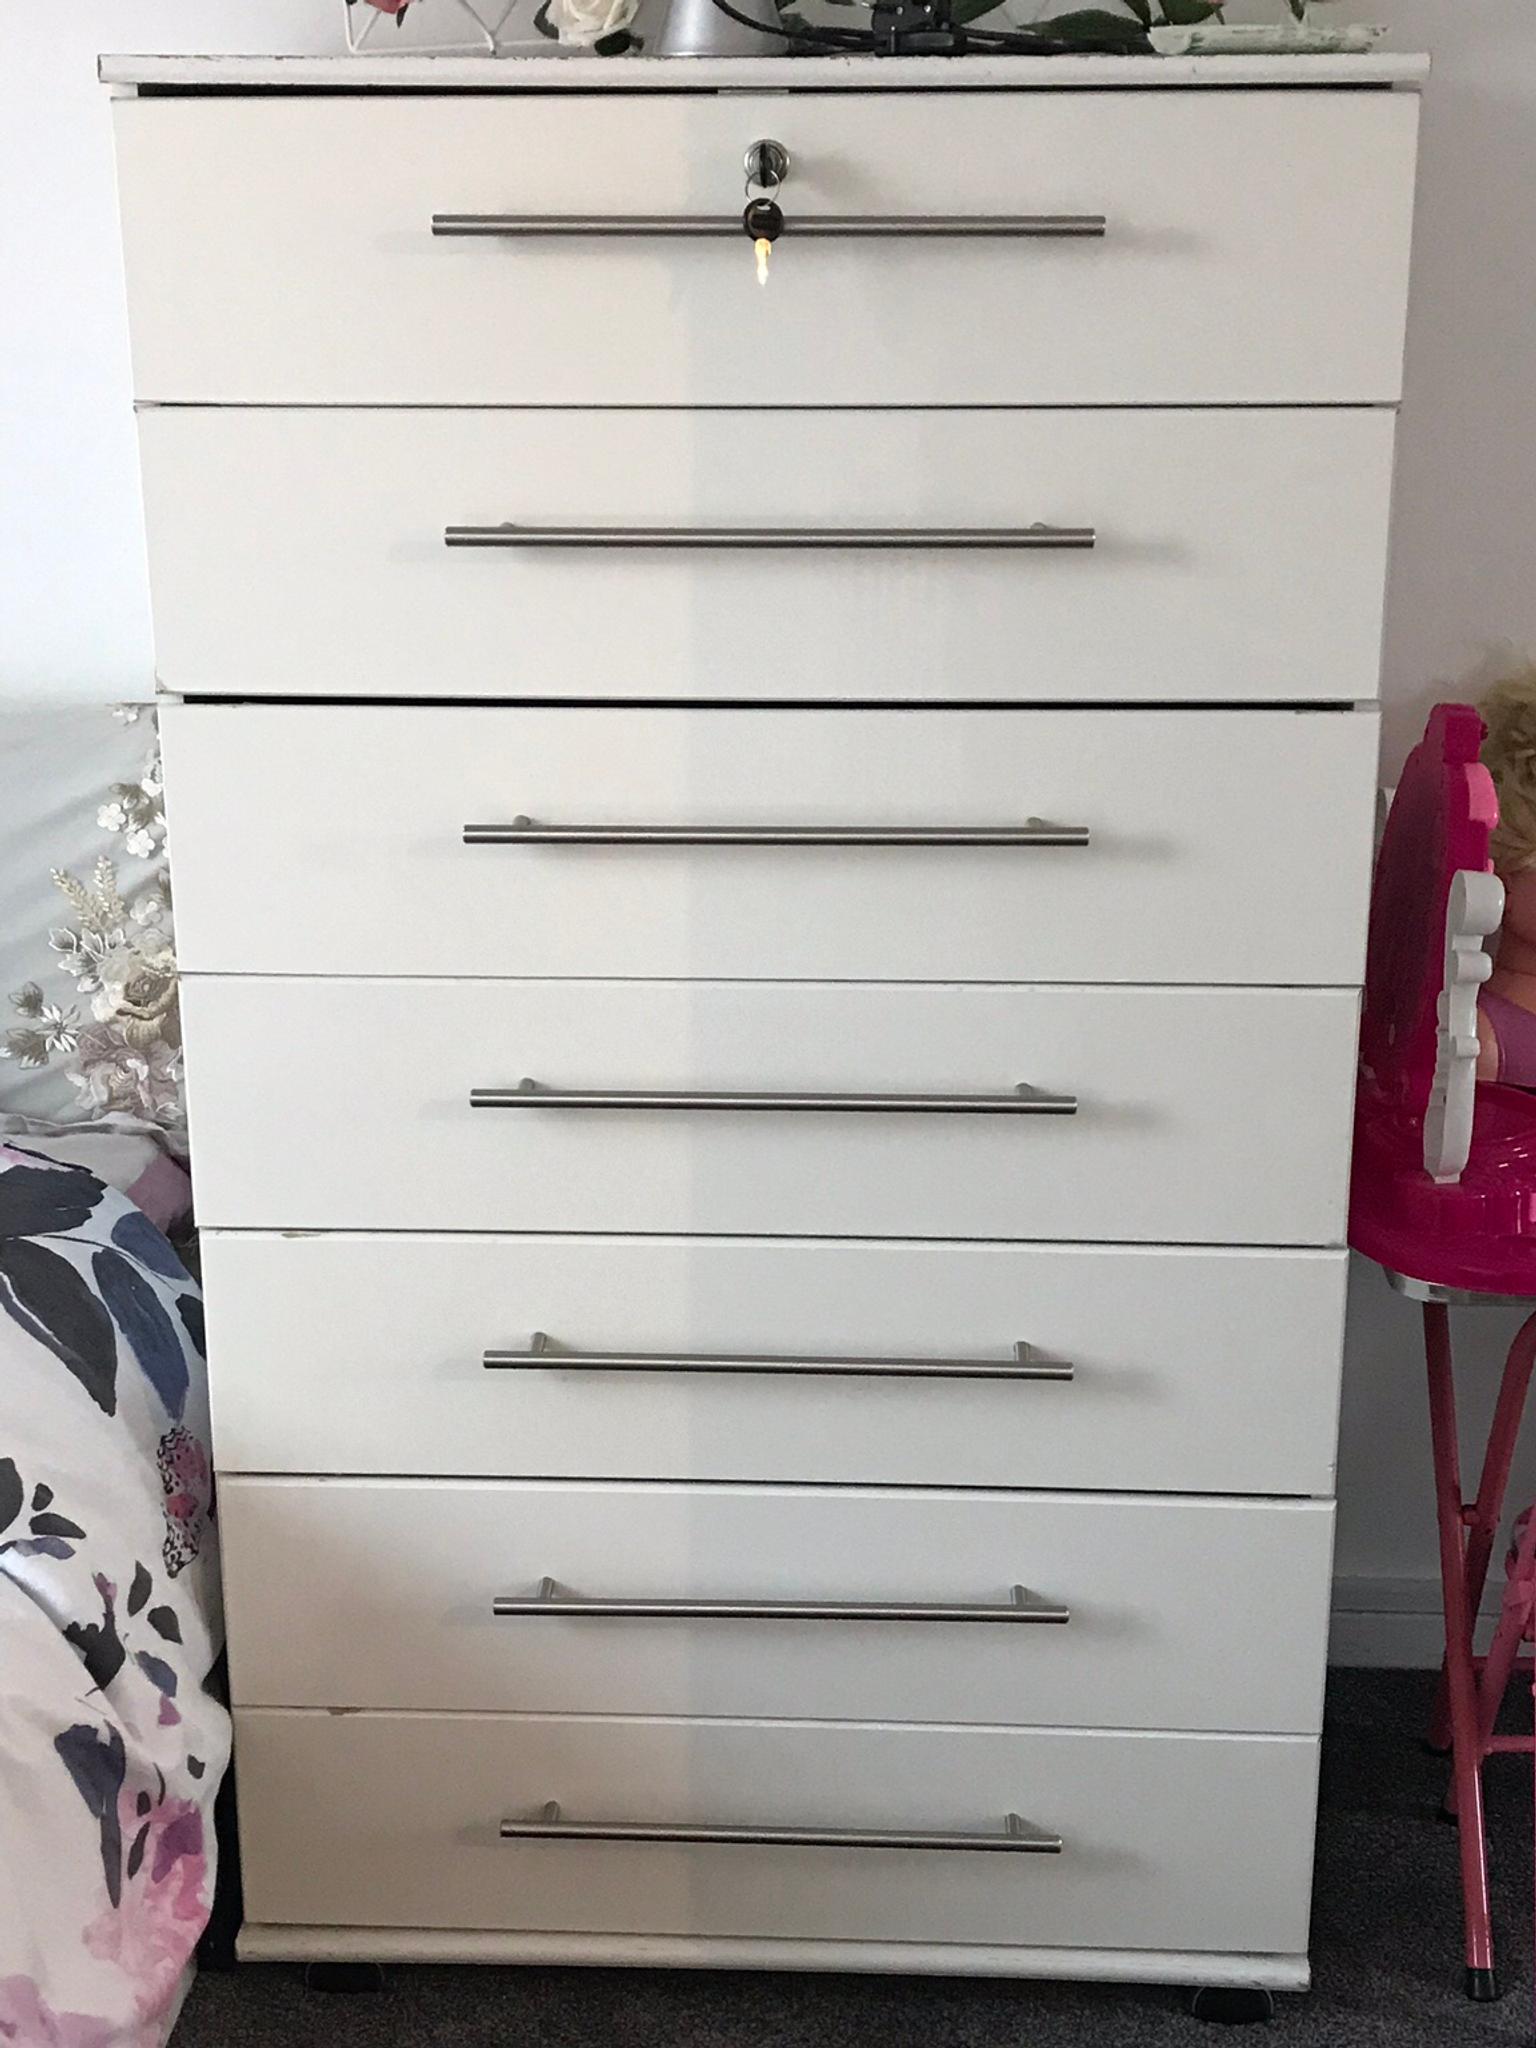 White Tall Chest Drawer In E1 Hamlets For 60 00 For Sale Shpock